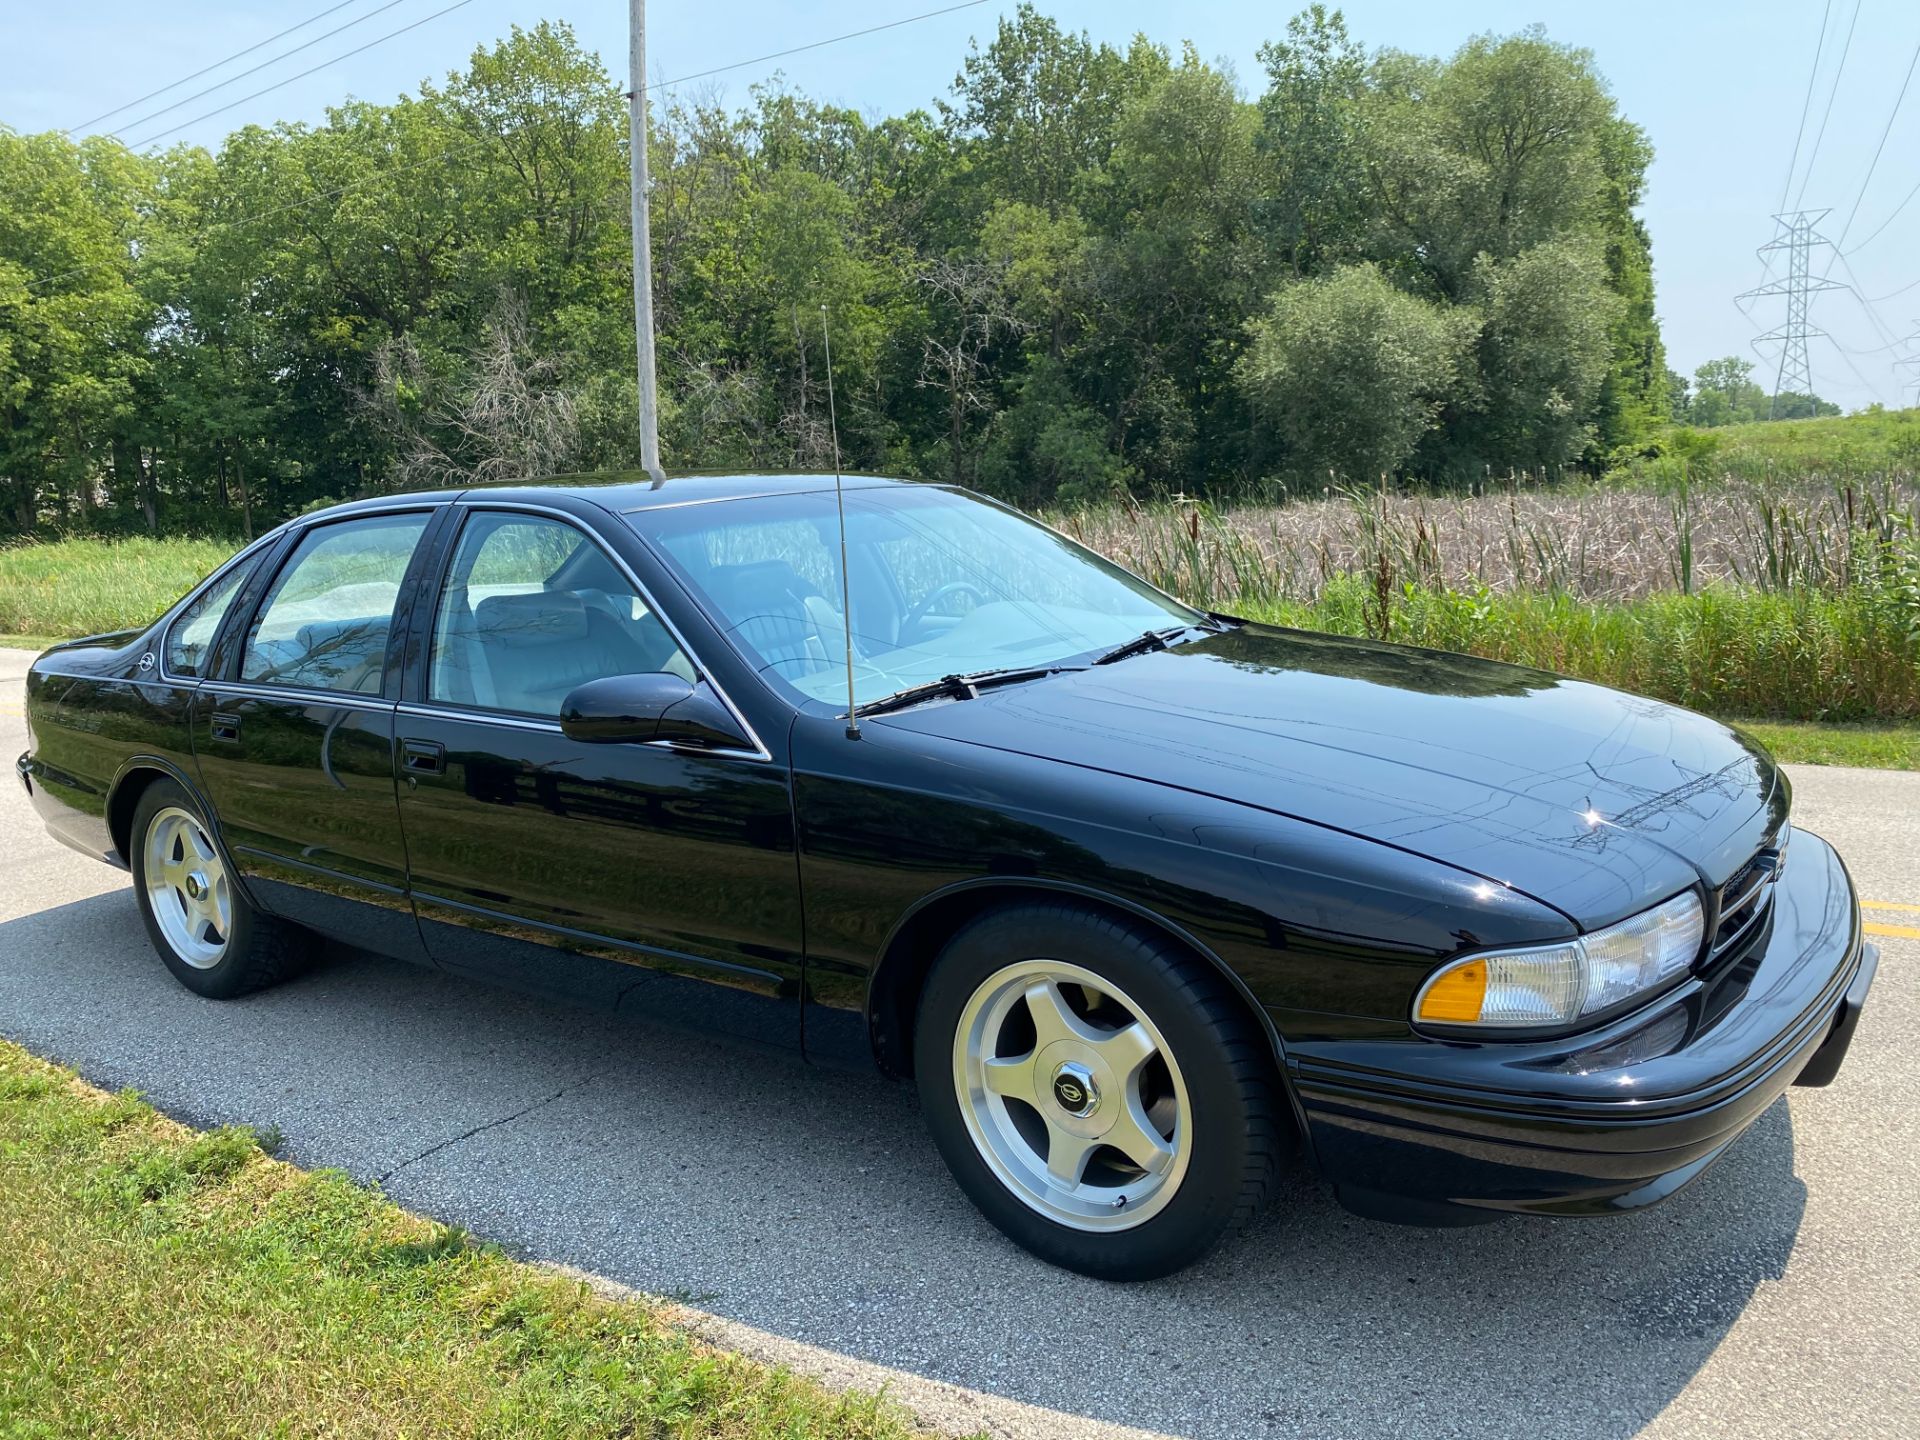 1996 Chevrolet Impala SS in Big Bend, Wisconsin - Photo 11